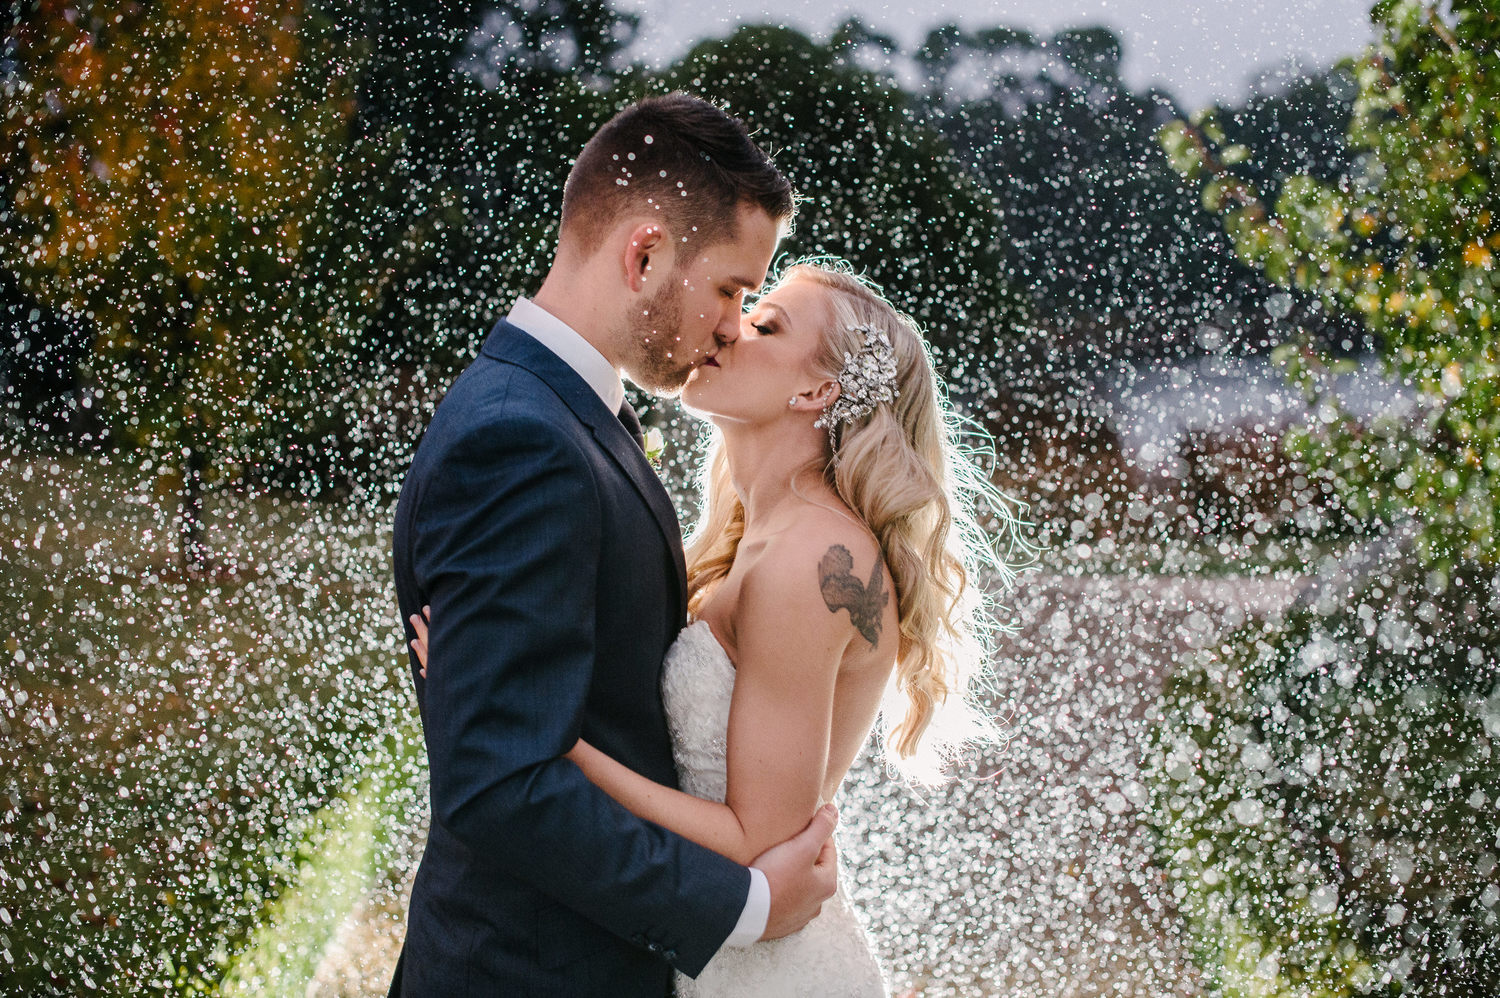 Bride and groom sharing a kiss at their rainy day wedding